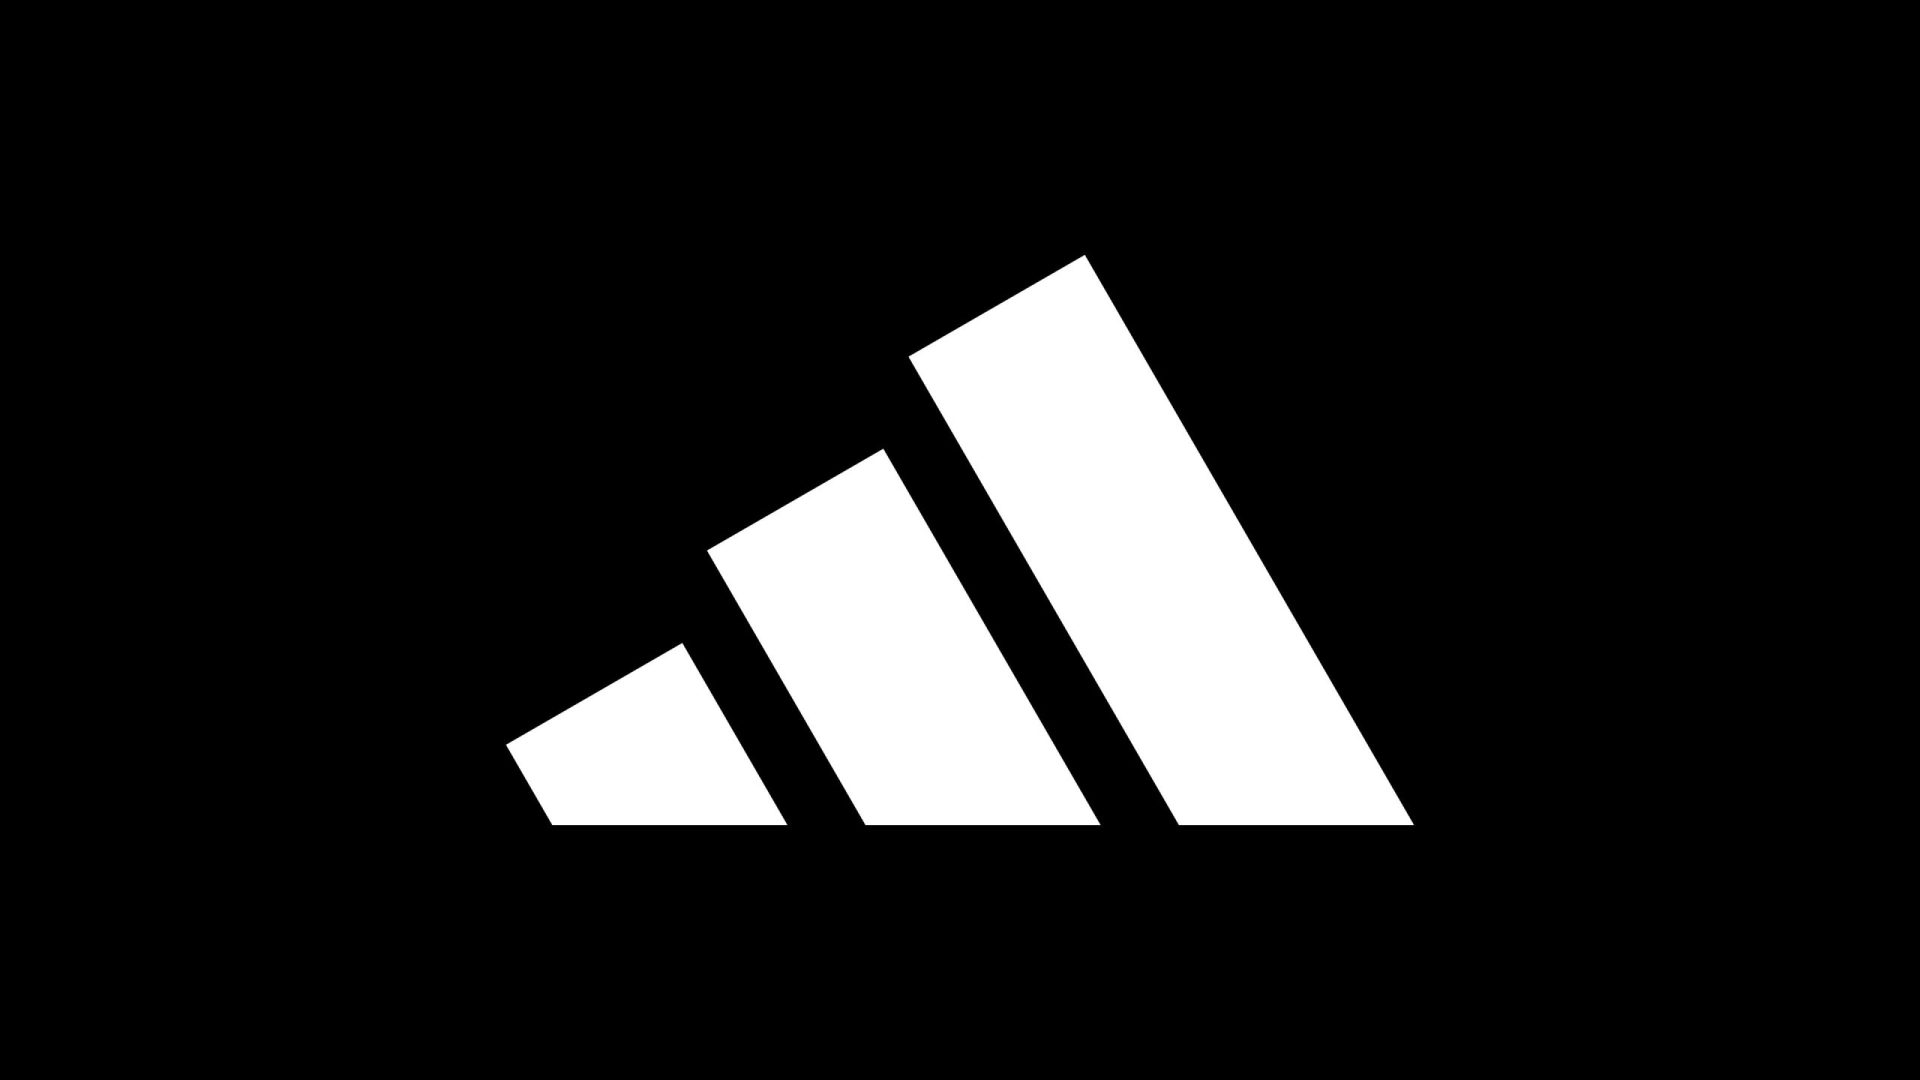 Adidas Logo: The History and Evolution of the Iconic Three Stripes